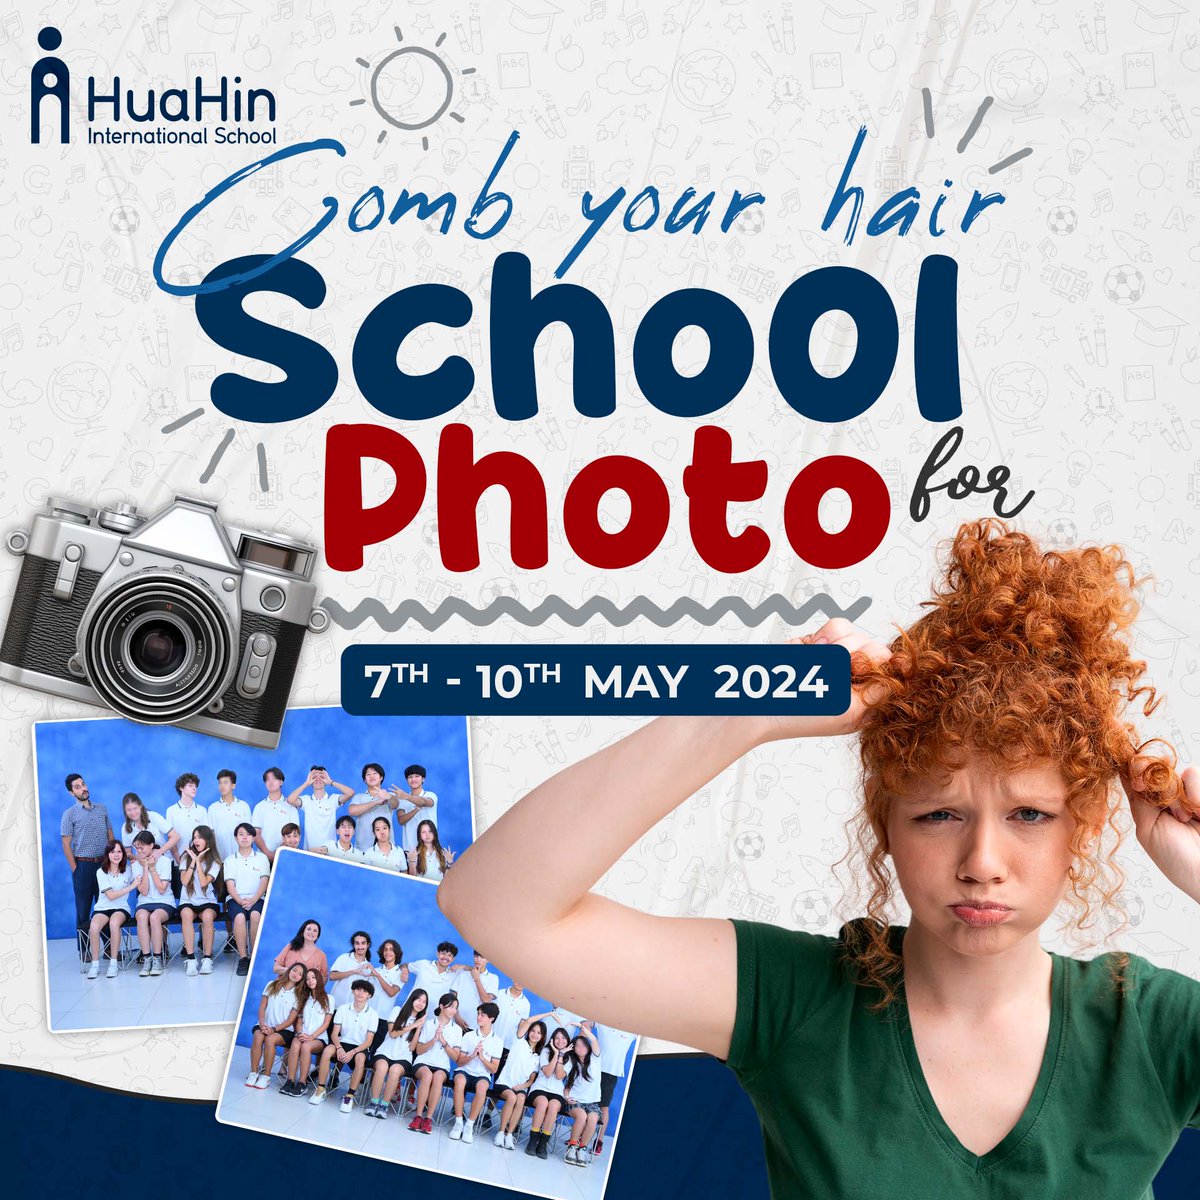 Get ready to capture your best look! 📸✨ It's school photo days this week, so don't forget to comb your hair and put on your brightest smile! 😊

#schoolphotos  #earlyyears #kindergarten #primary #secondary #igcse #ib  #HuaHin #internationalschool #BlackMountain #edu